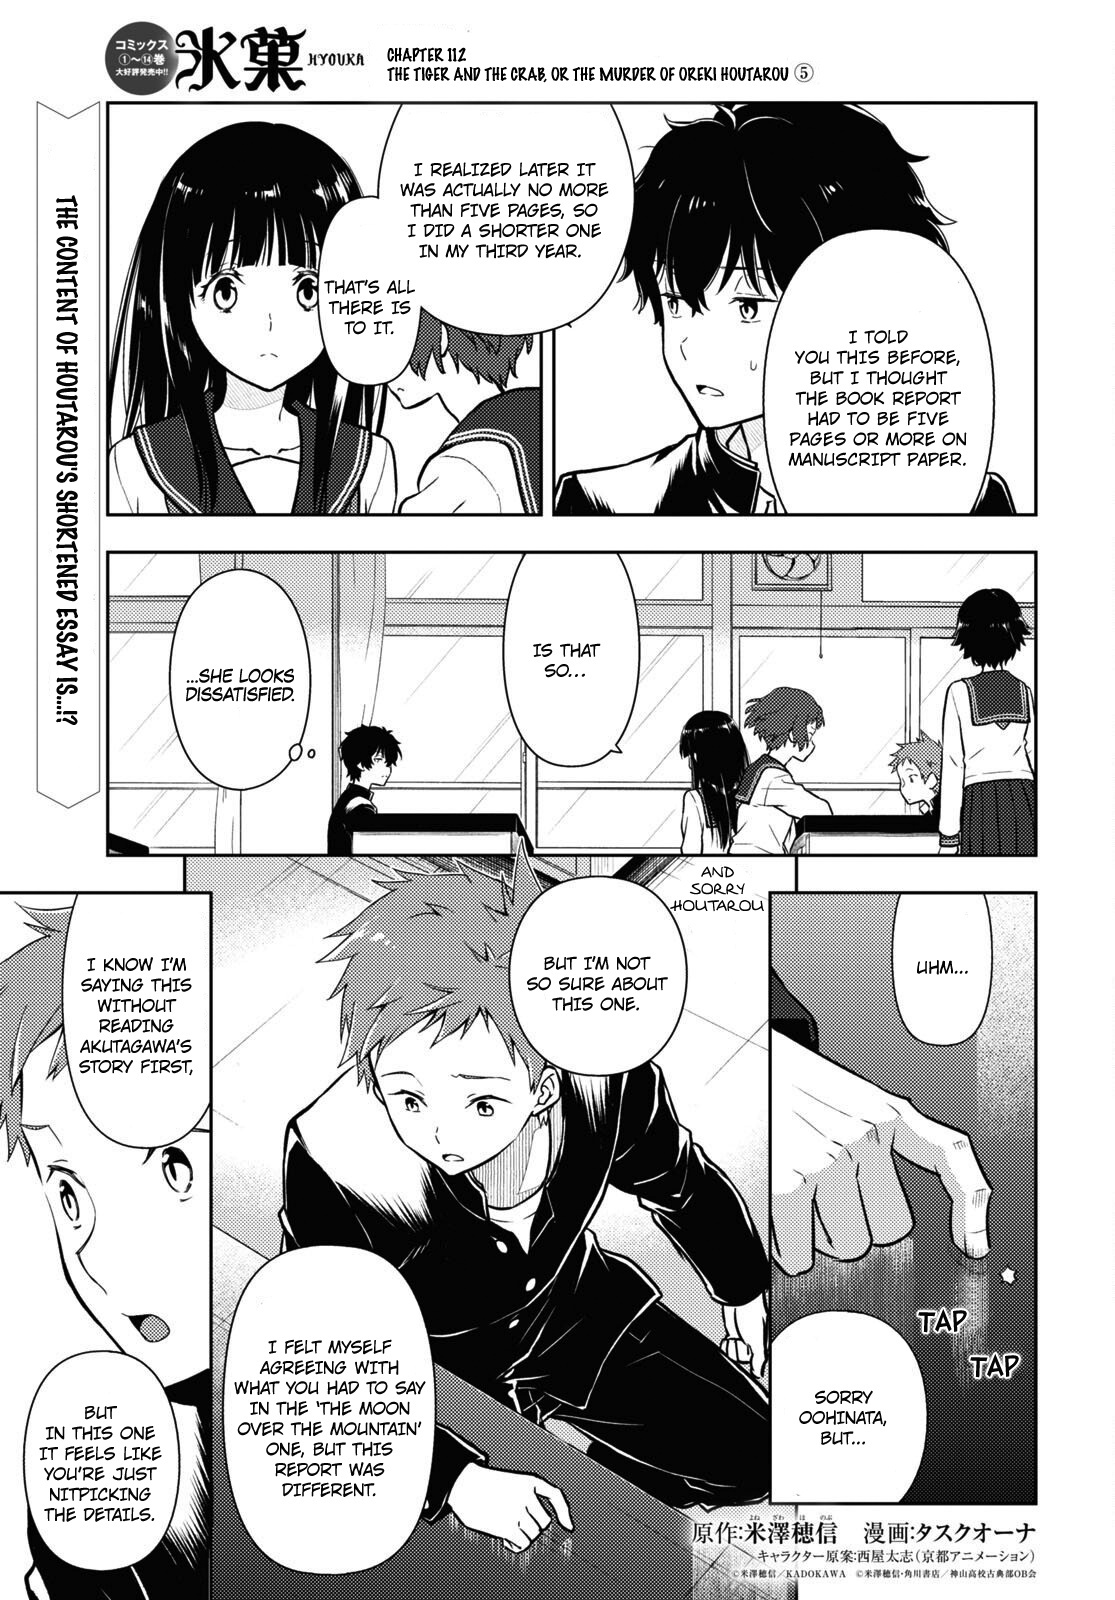 Hyouka Chapter 112: The Tiger And The Crab, Or The Murder Of Oreki Houtarou ⑤ - Picture 1